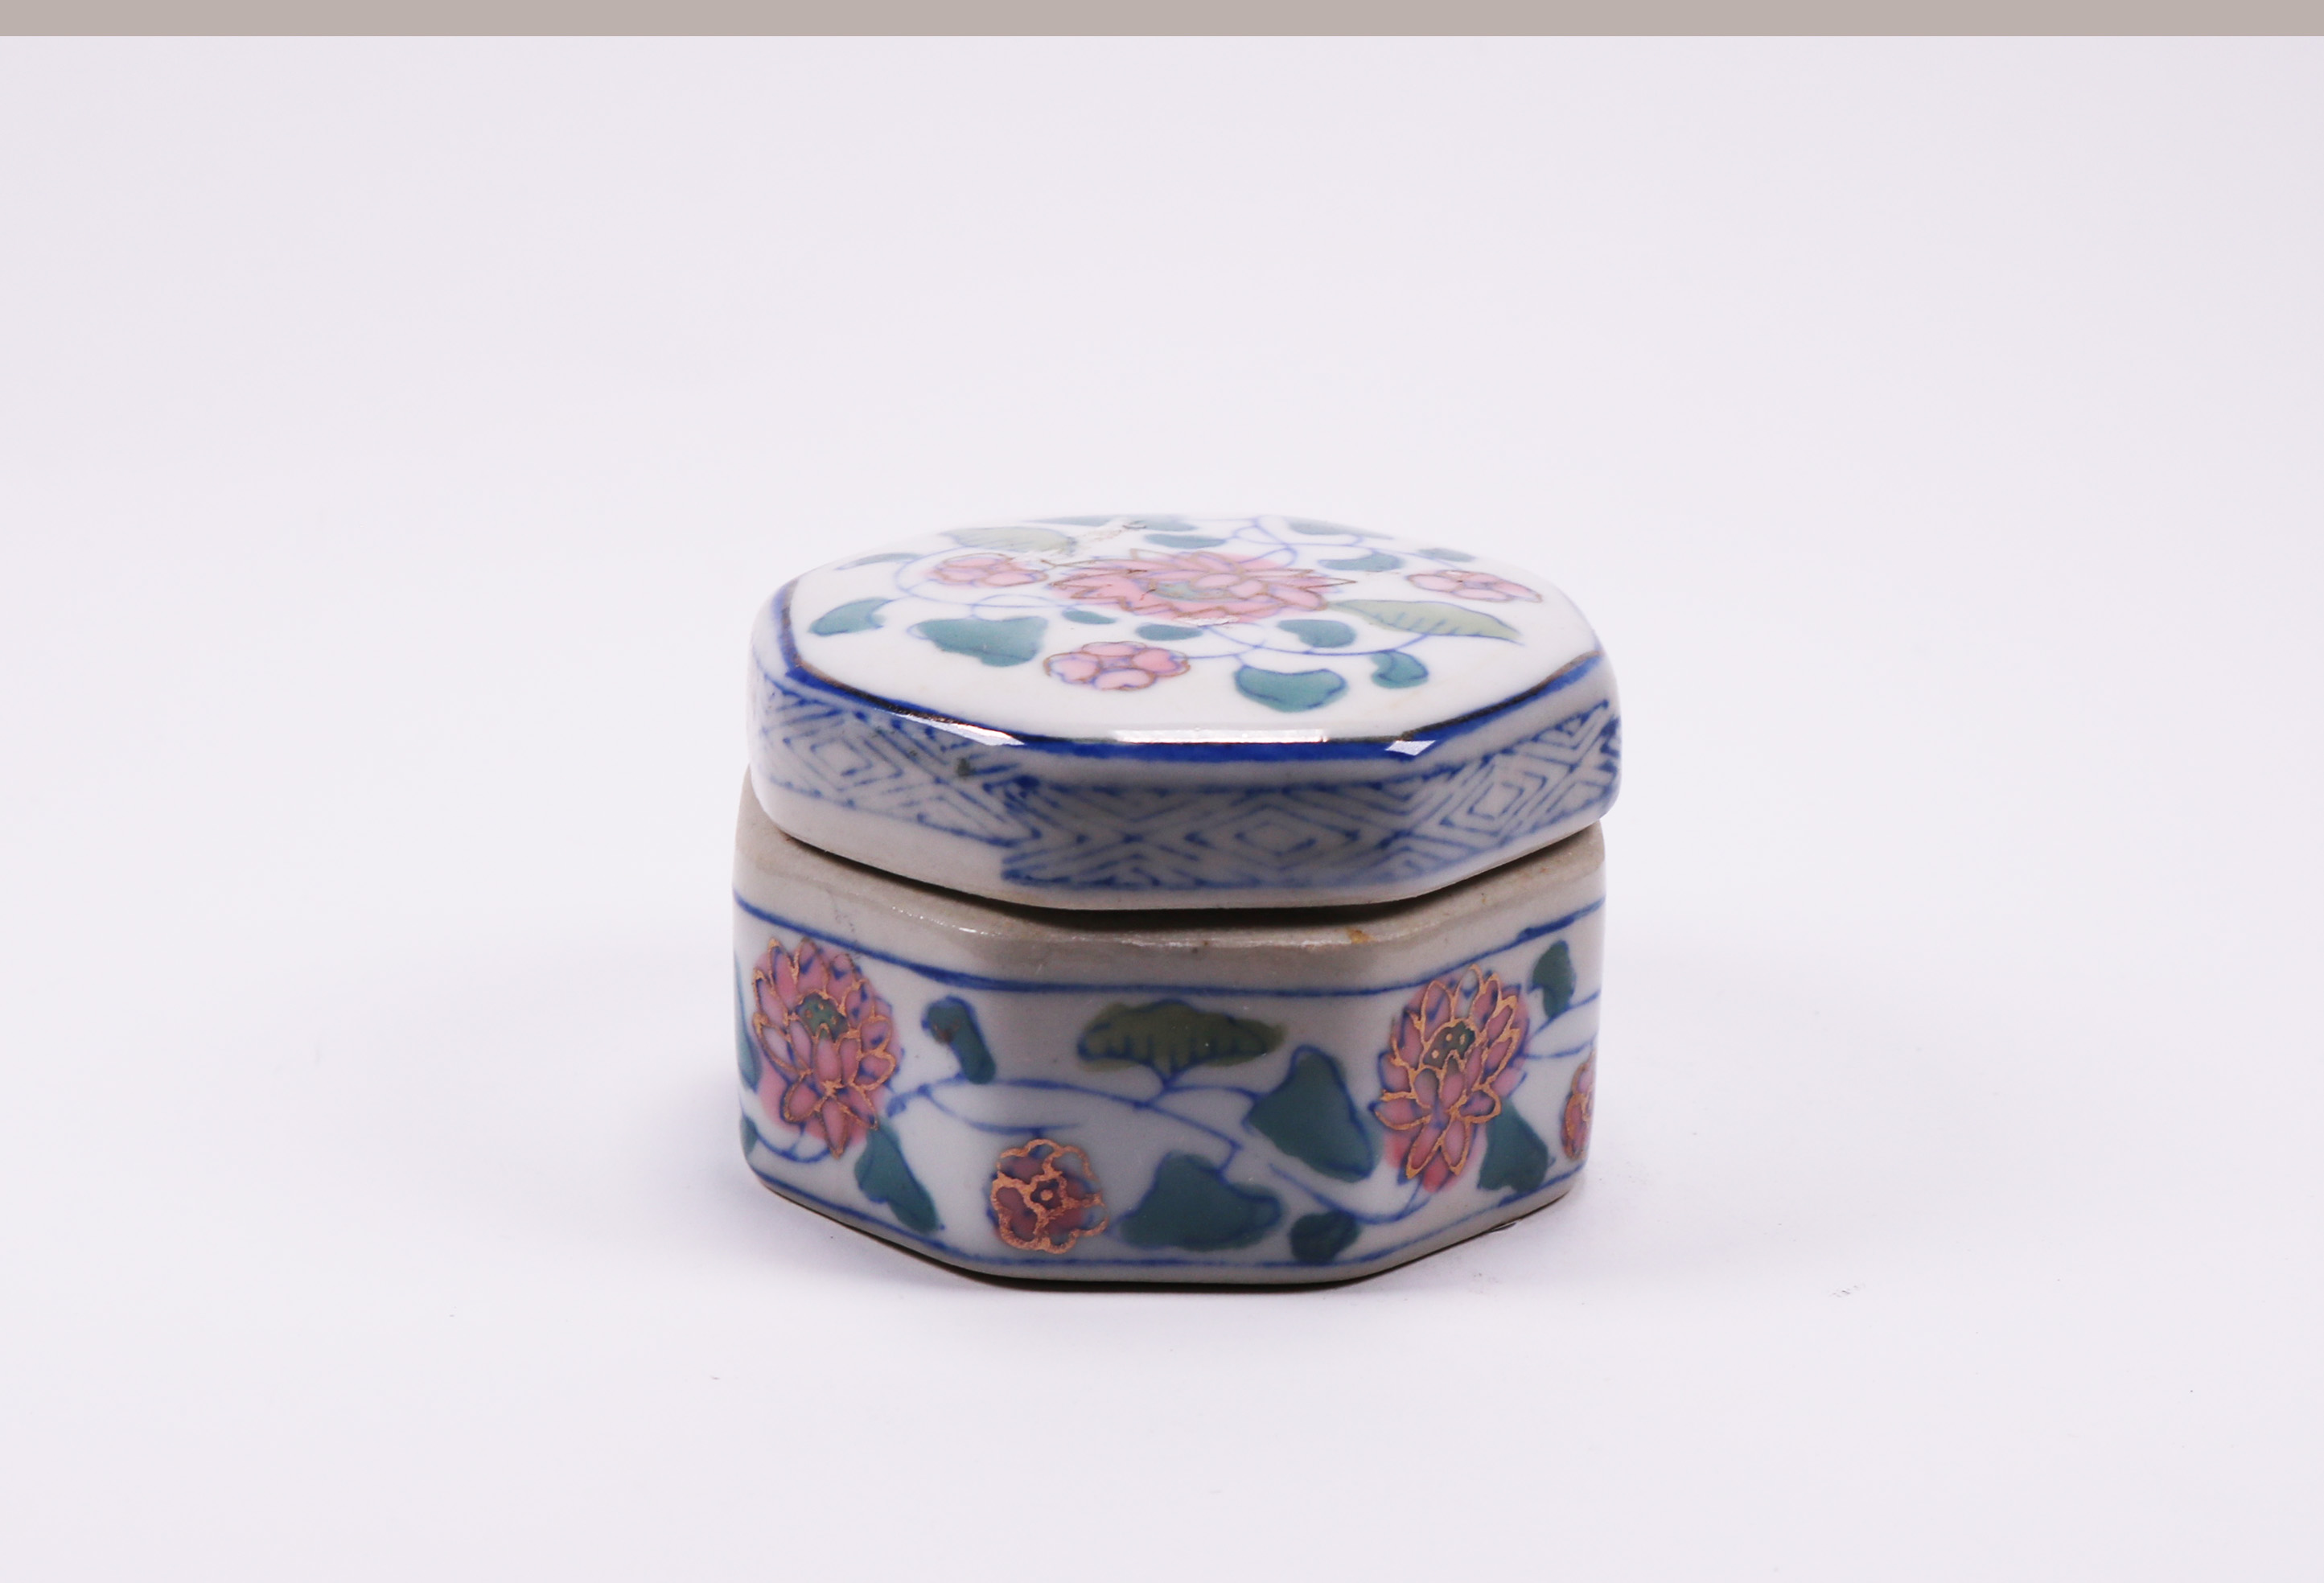 Vintage Porcelain Trinket Ring Box With Blue And White Flowers, Hexagon Shaped Trinket Box